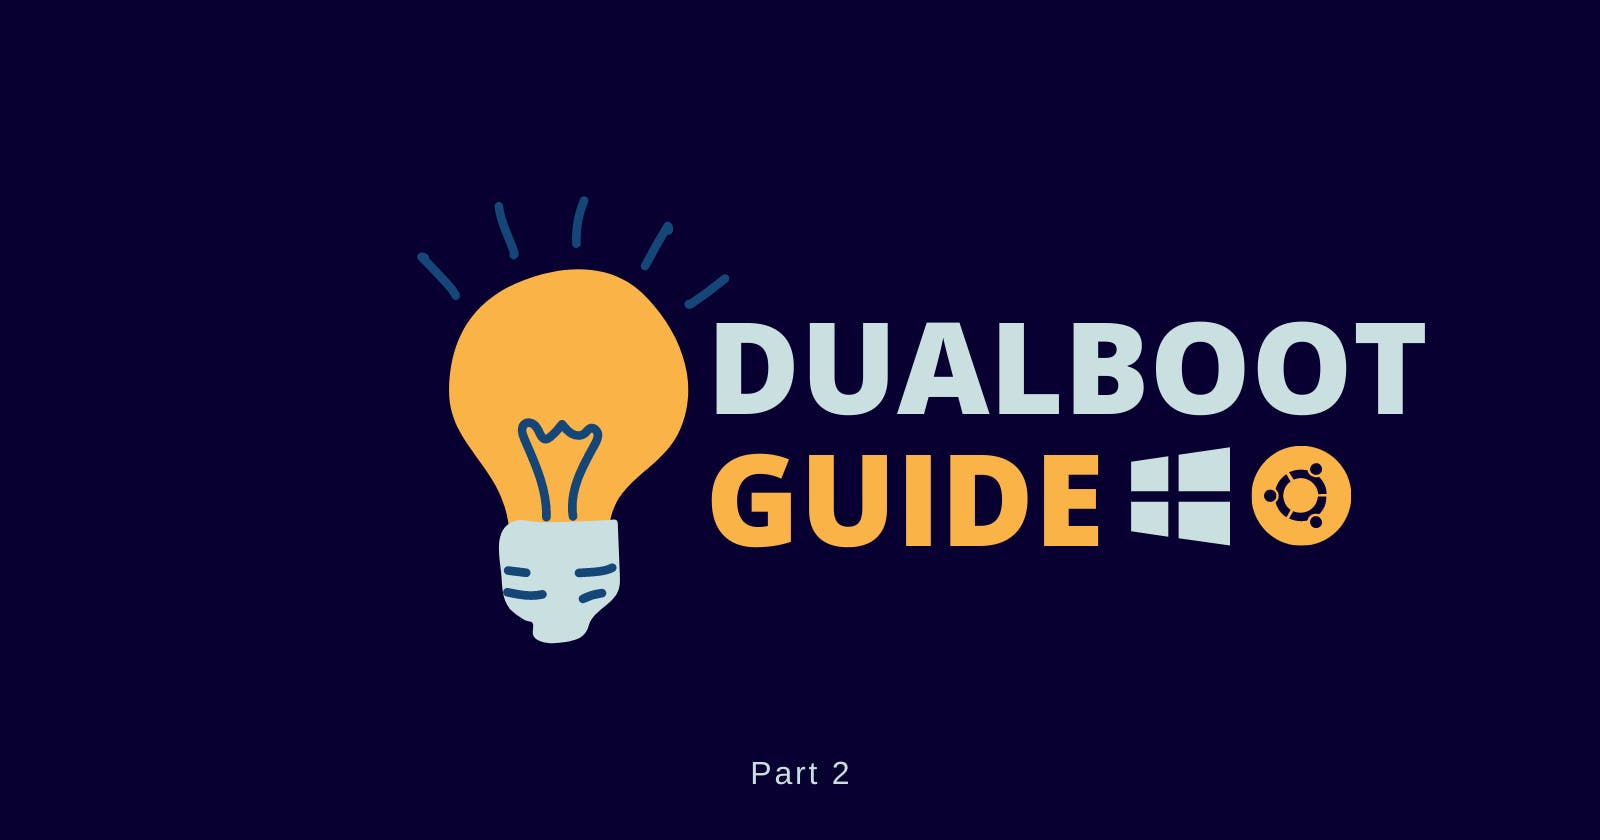 A beginner's guide to Dualbooting Windows with Ubuntu: Part 2